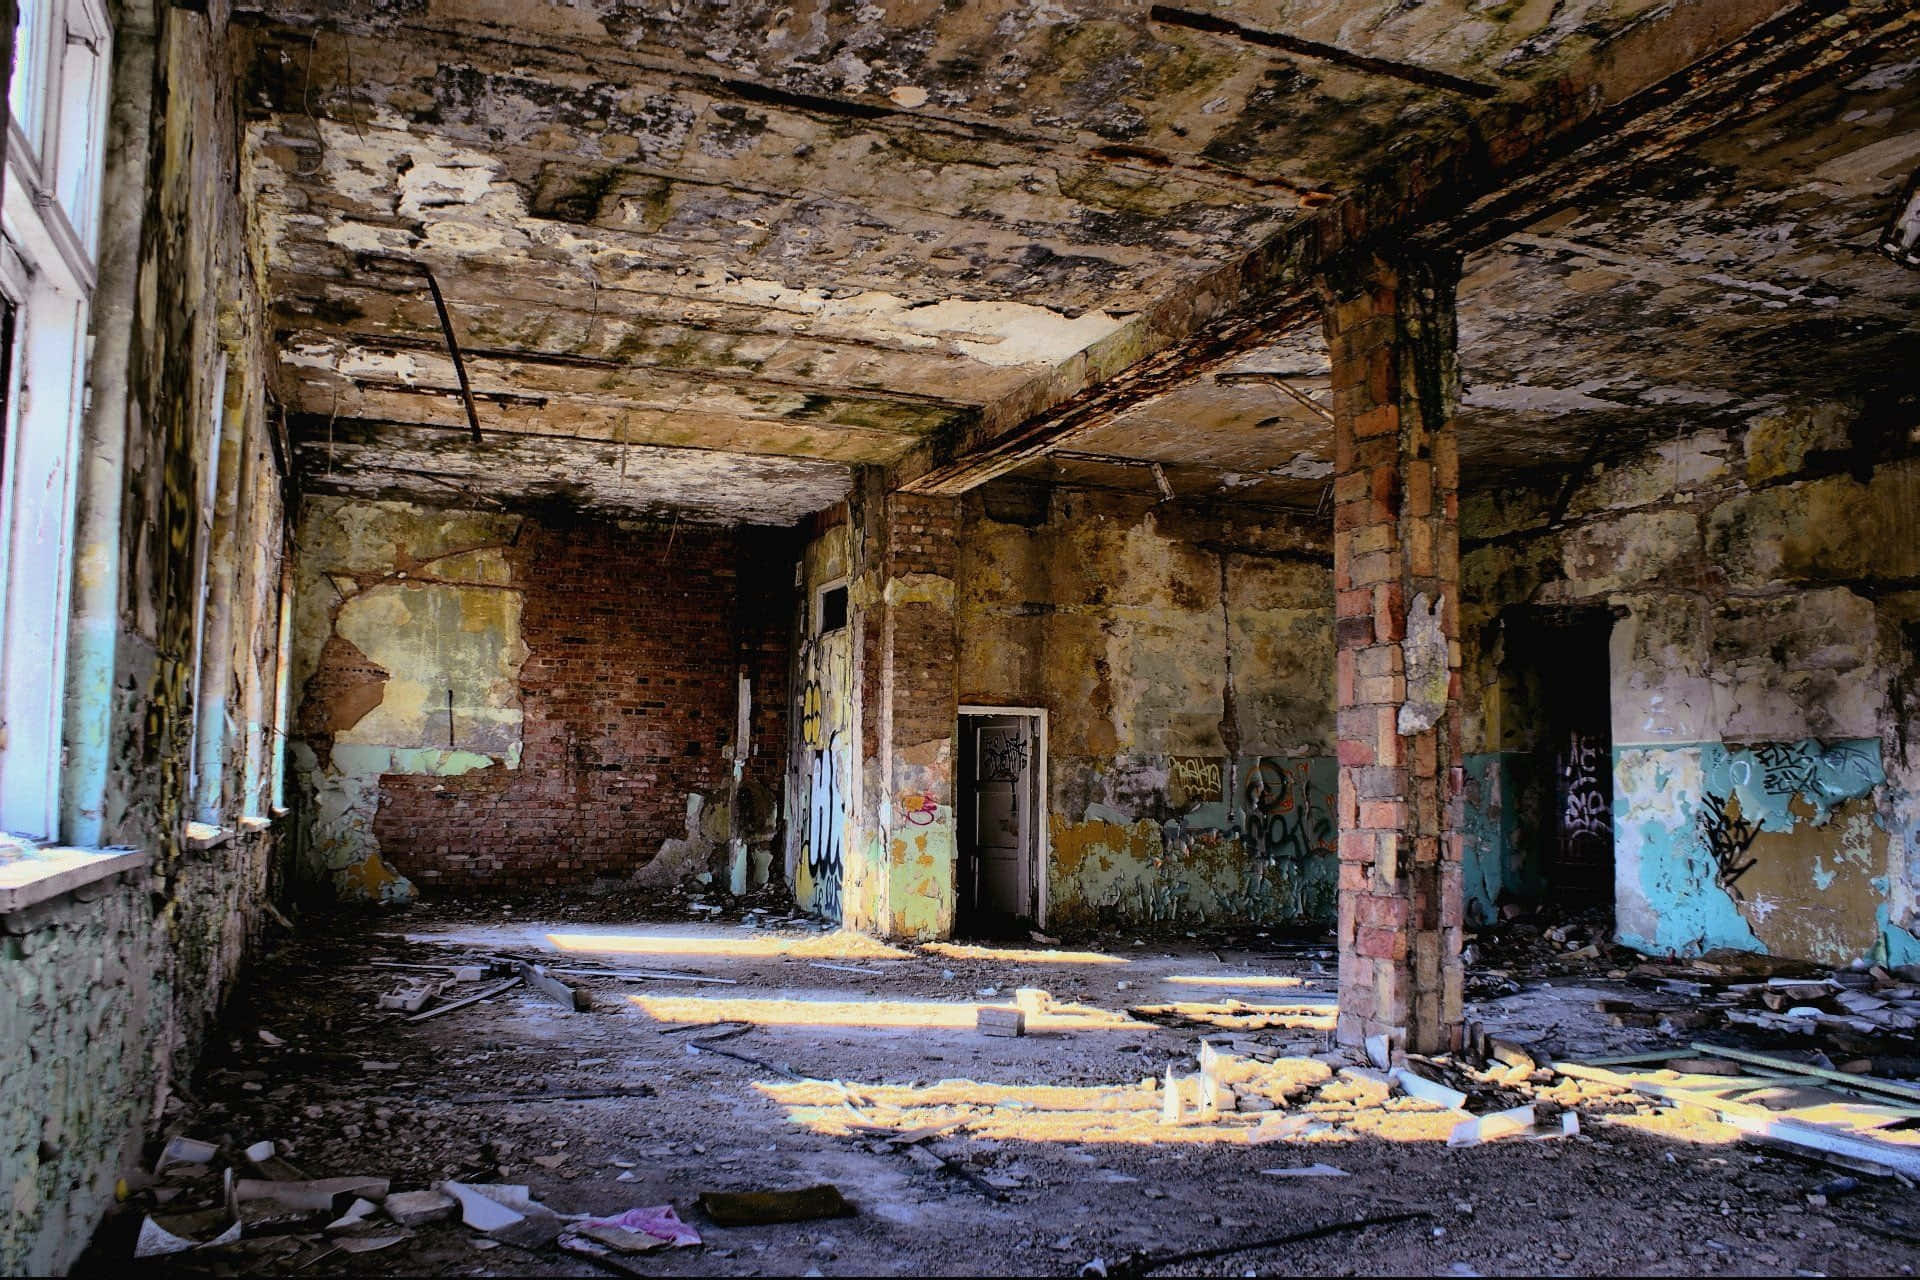 An Abandoned Building With A Broken Window